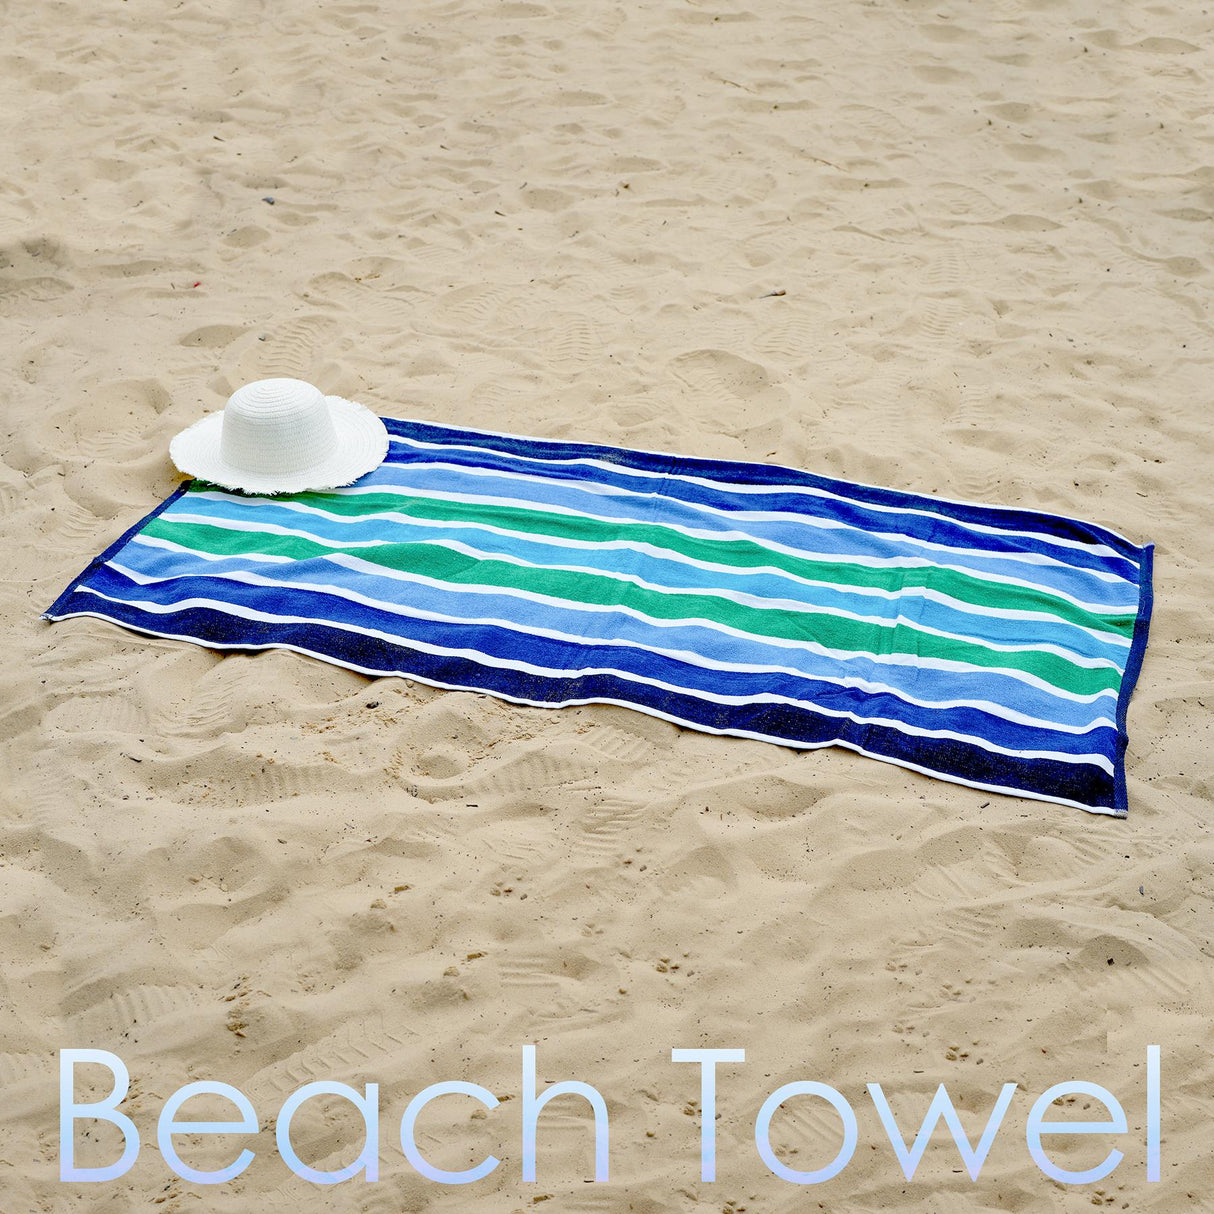 Large Velour Striped Beach Towel (Midnight Oasis) by Geezy - UKBuyZone